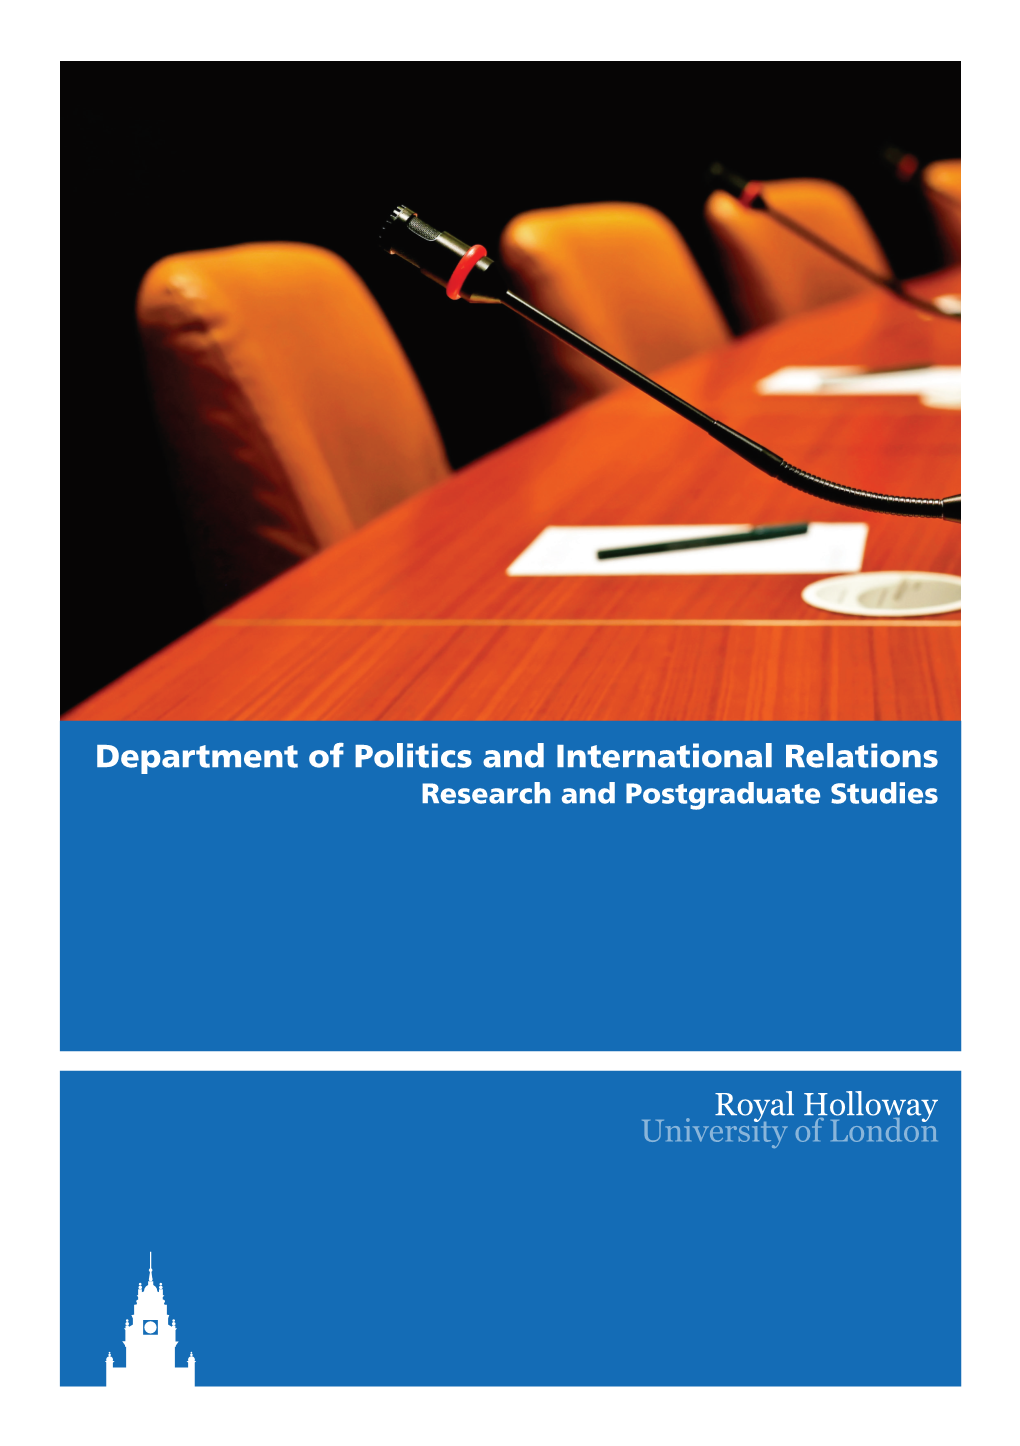 Department of Politics and International Relations Research and Postgraduate Studies Royal Holloway University of London